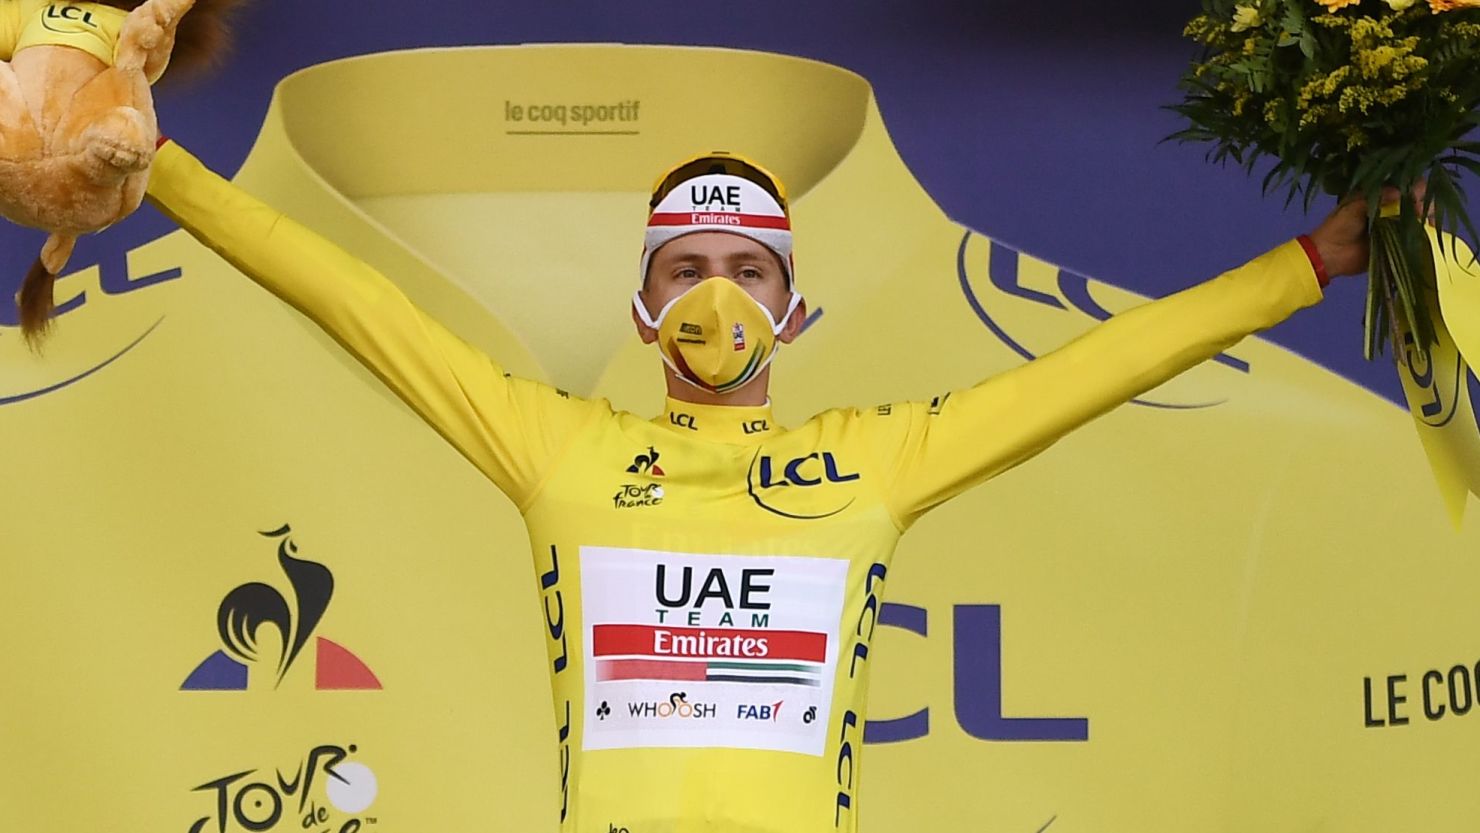 Tadej Pogacar proudly dons the yellow jersey on the podium after winning the 20th stage of the 107th edition of the Tour de France.